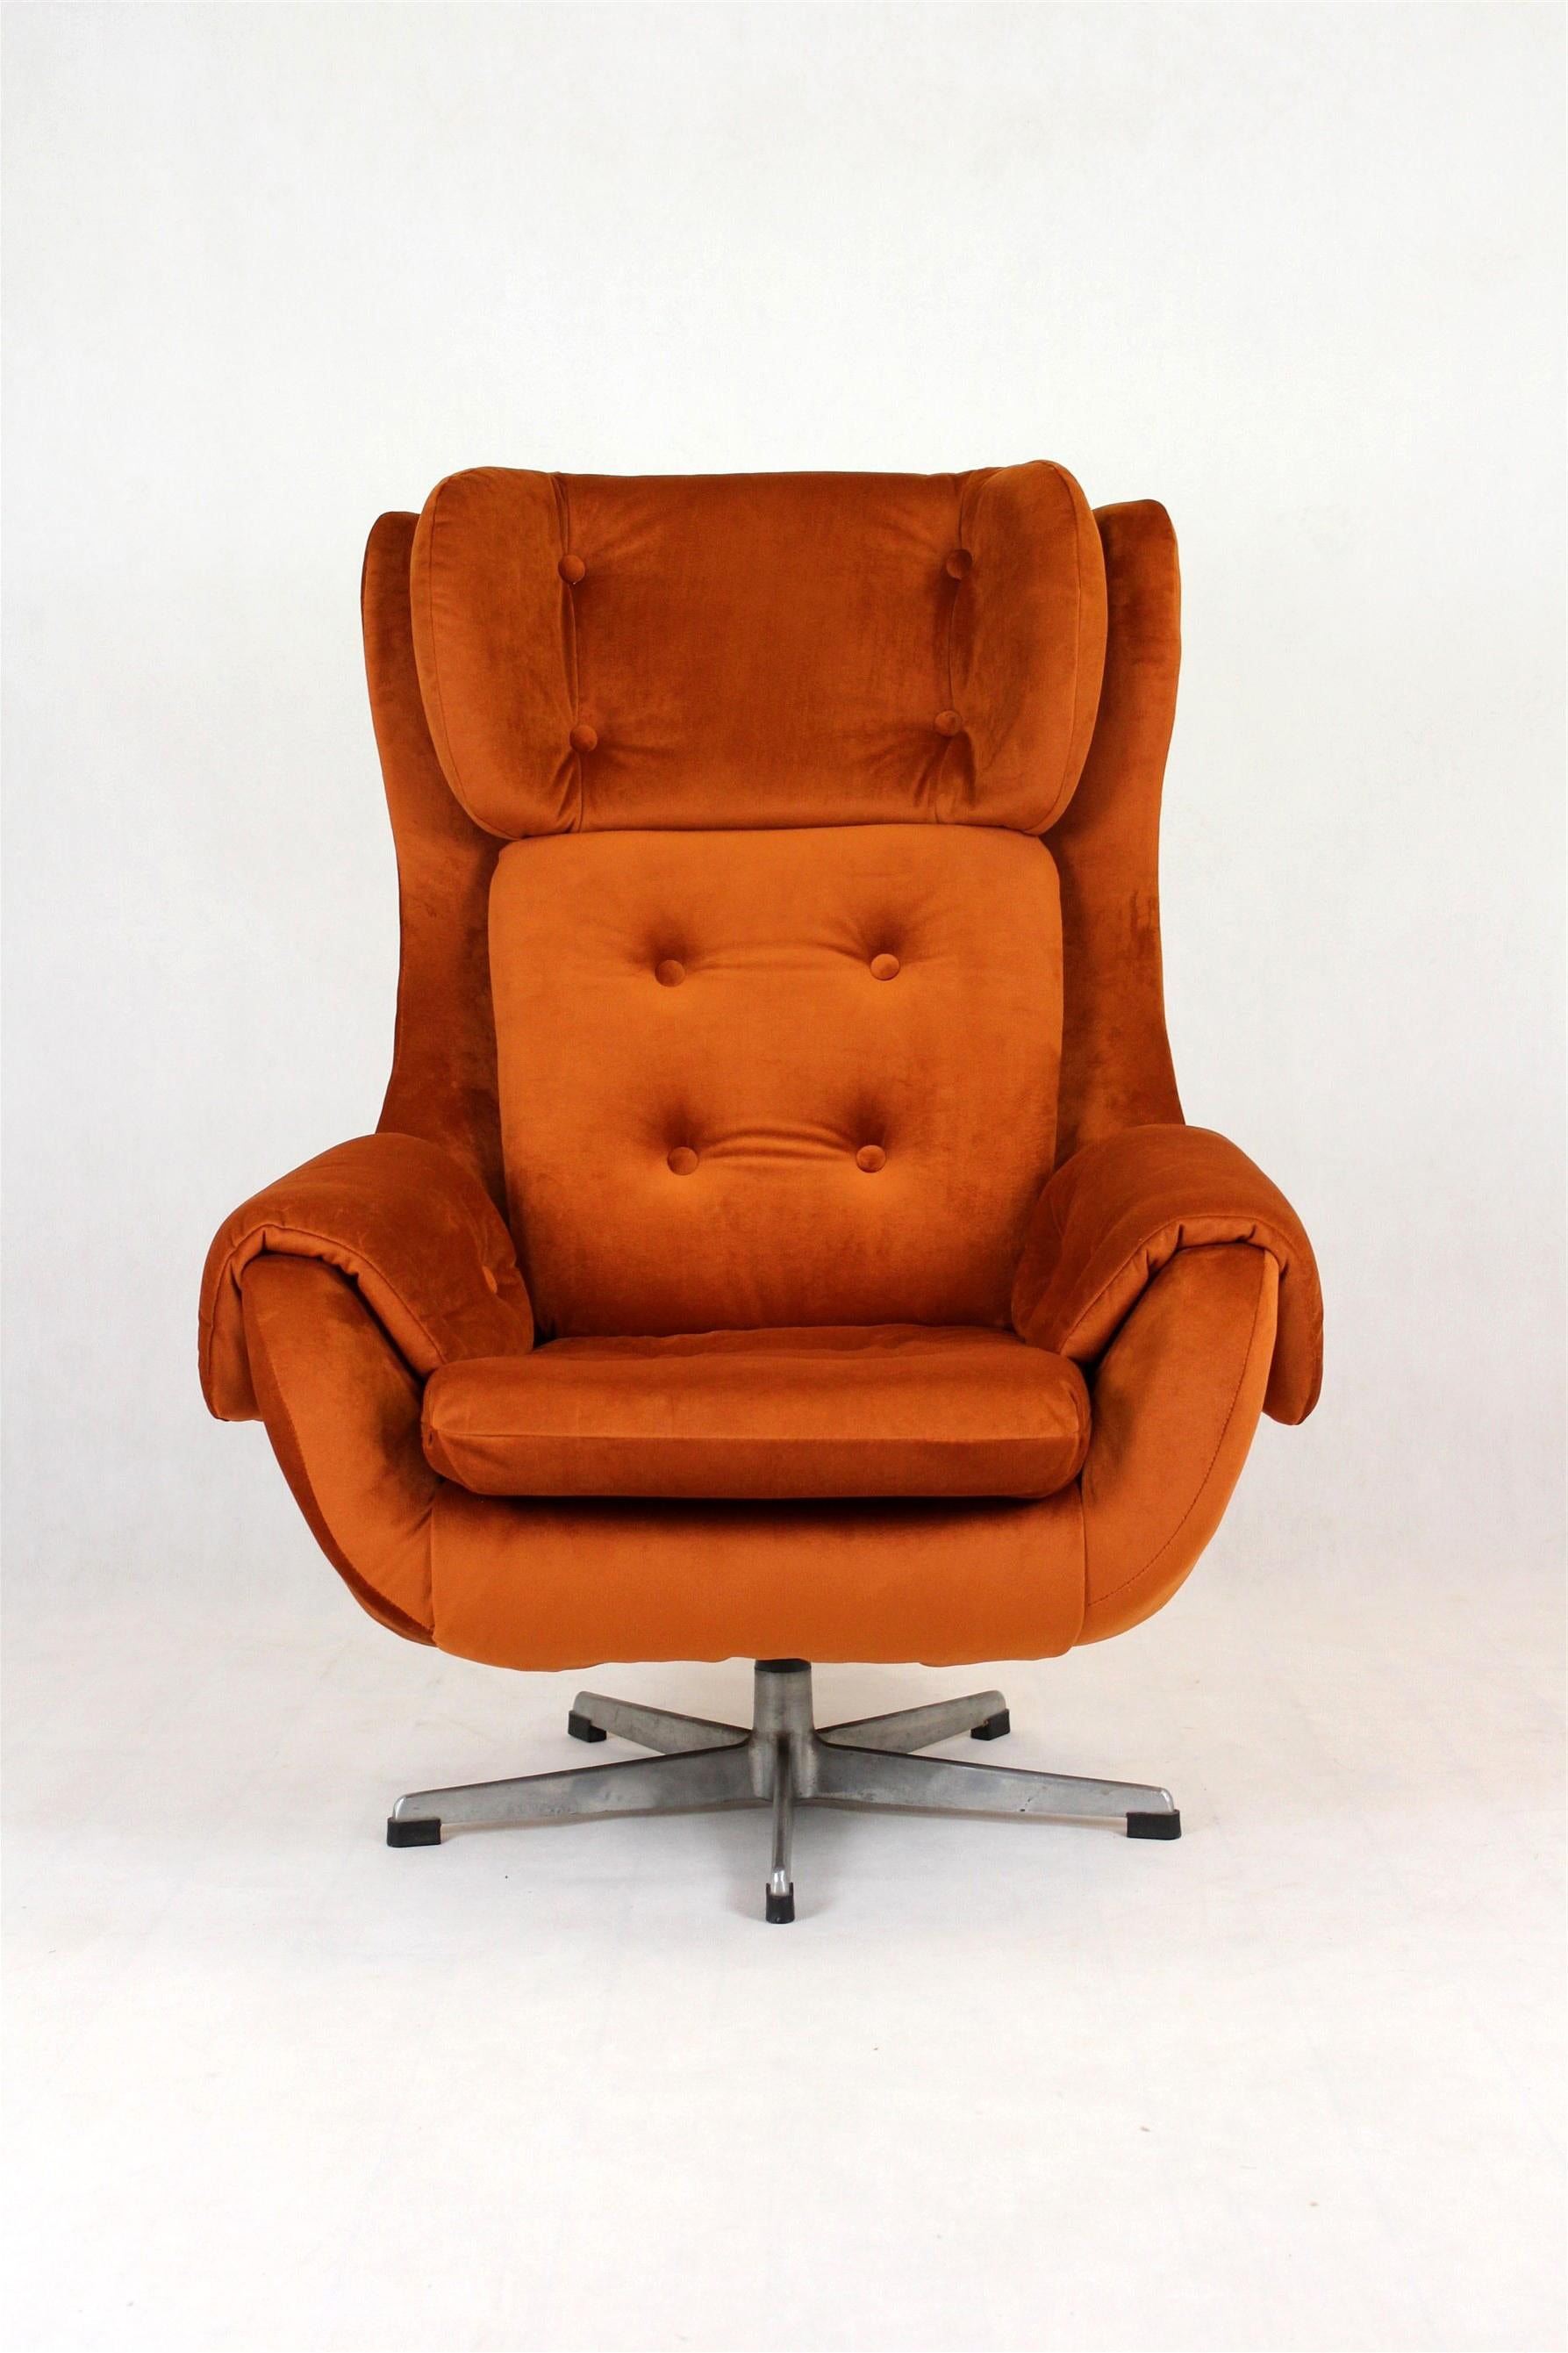 This wing swivel lounge chair was produced by UP Zavody Rousinov in the 1970s in former Czechoslovakia. The armchair has been restored, has new foams and is upholstered in high-quality fabric.

 